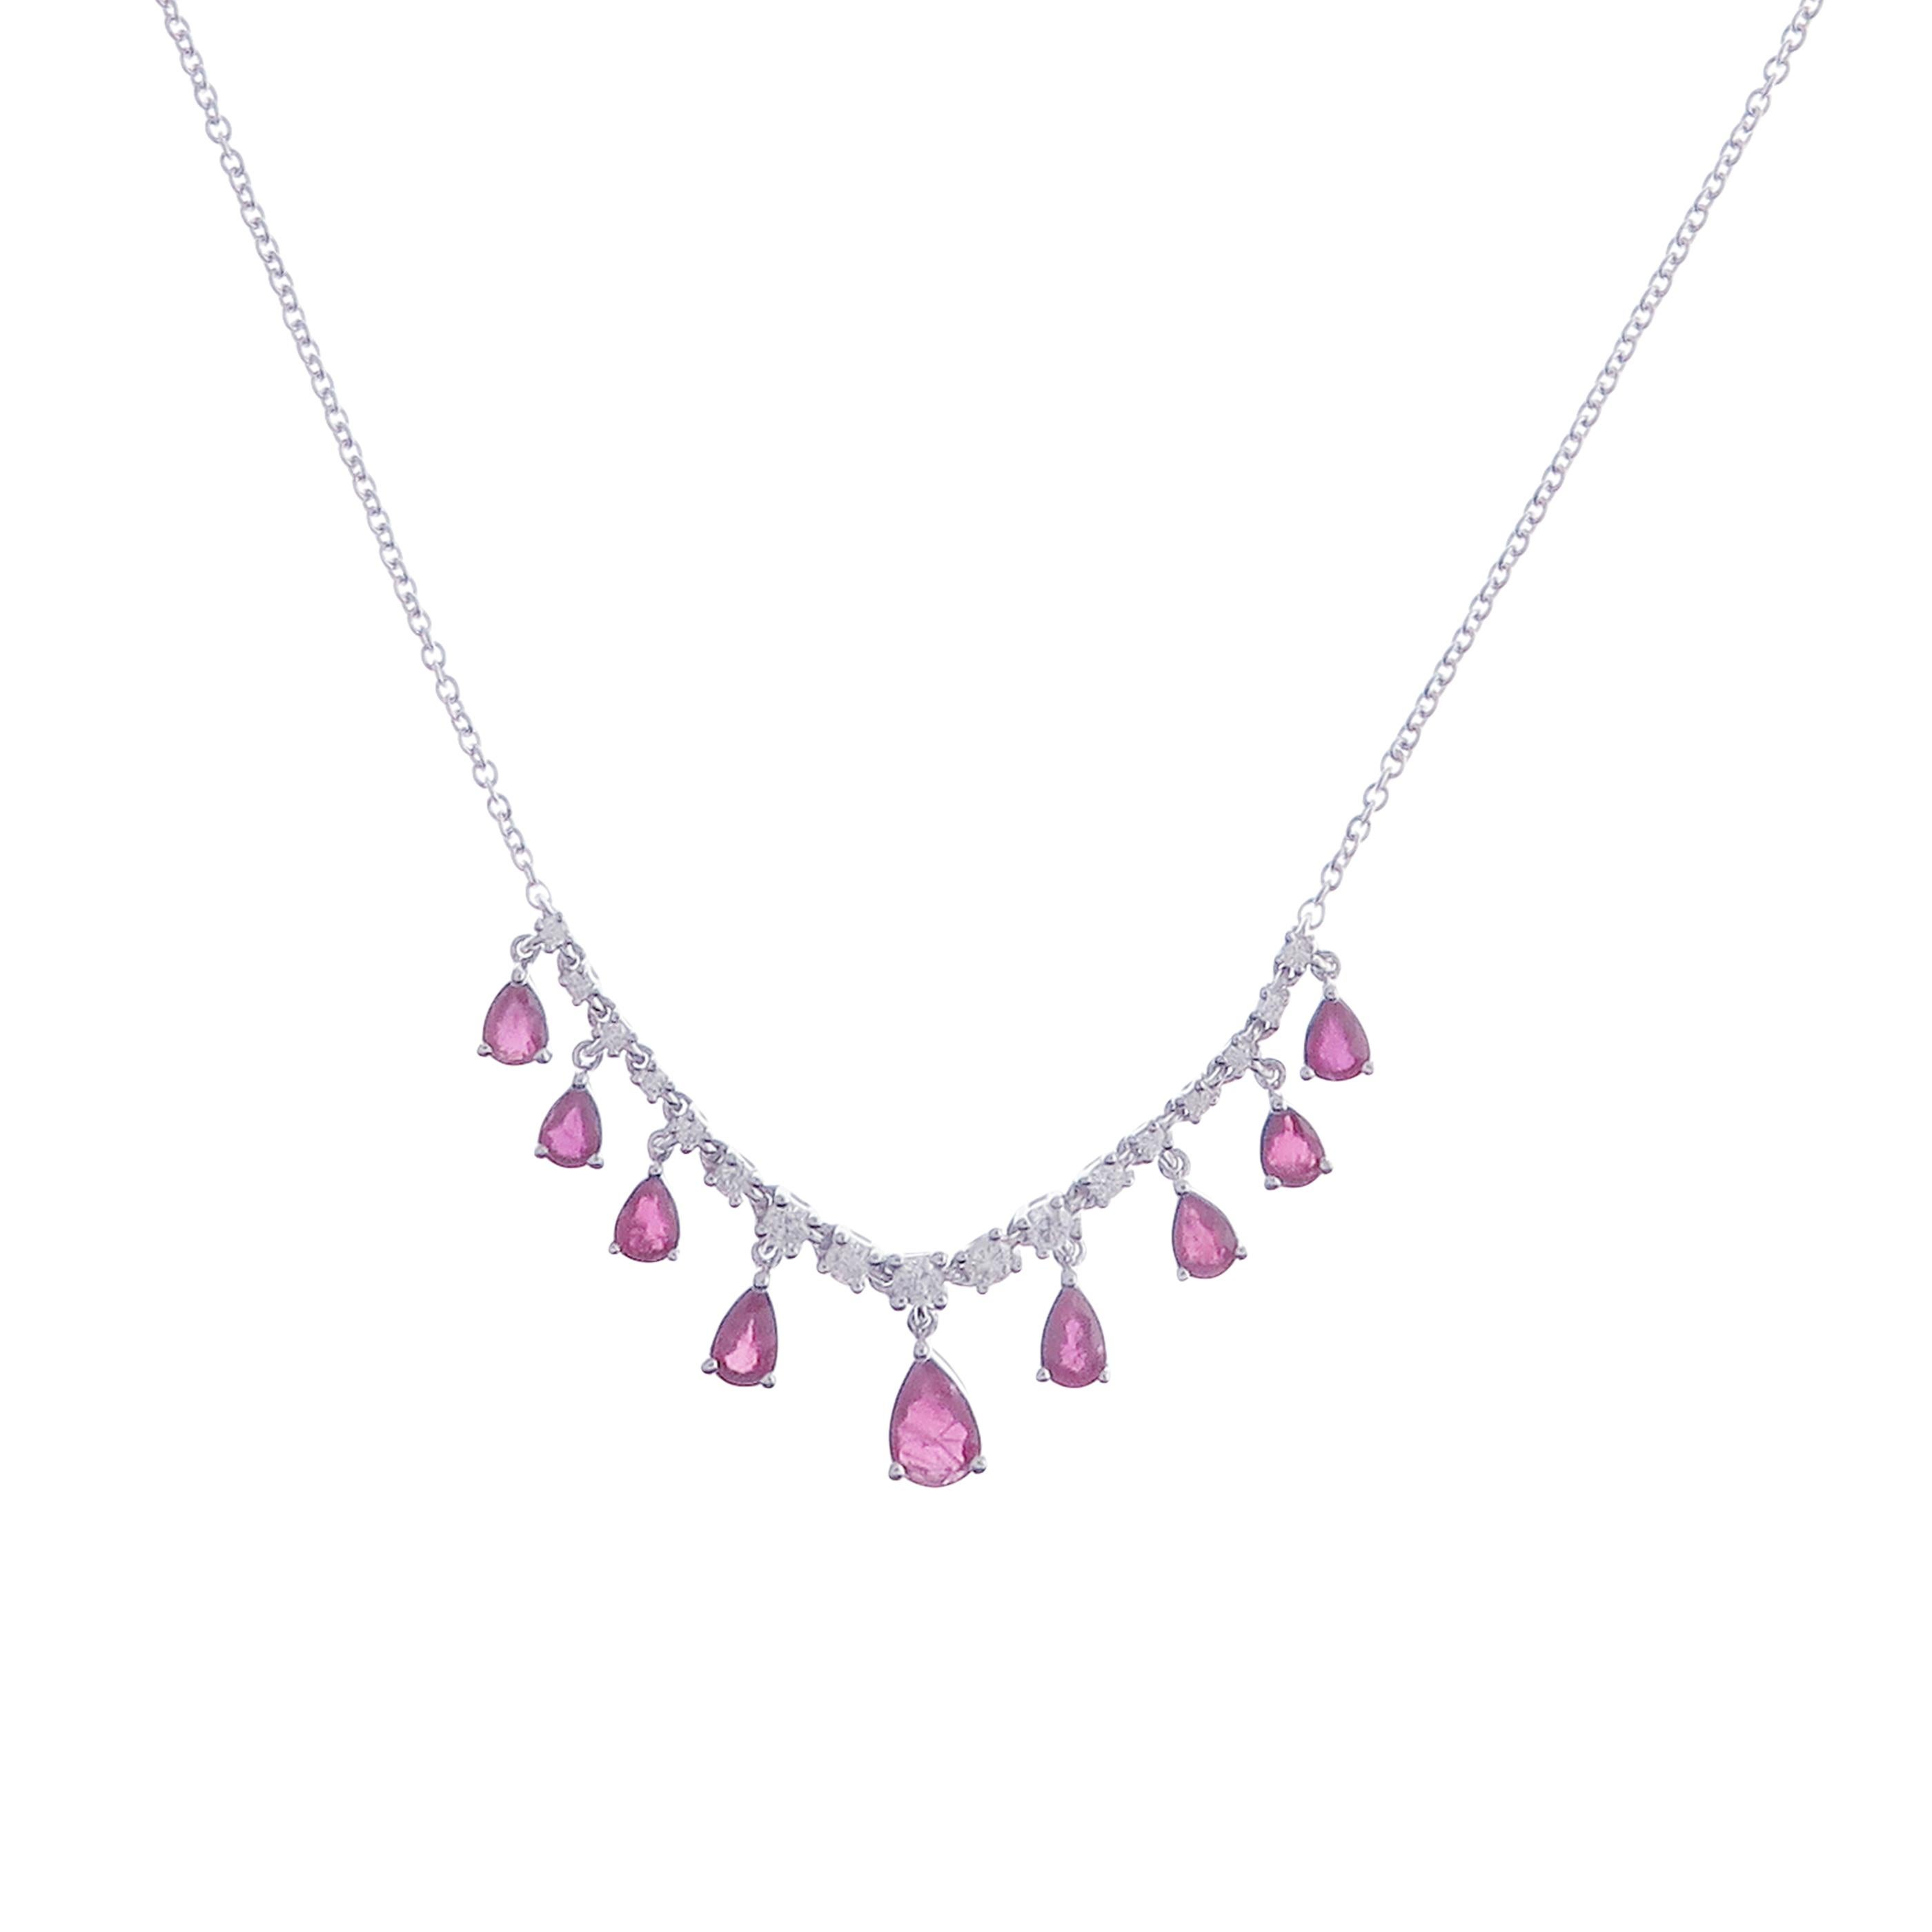 This ruby pear drop necklace is crafted in 18-karat white gold, weighing approximately 1.93 total carats of rubies and 0.34 total carats of SI Quality white diamonds. 

Necklace is 16